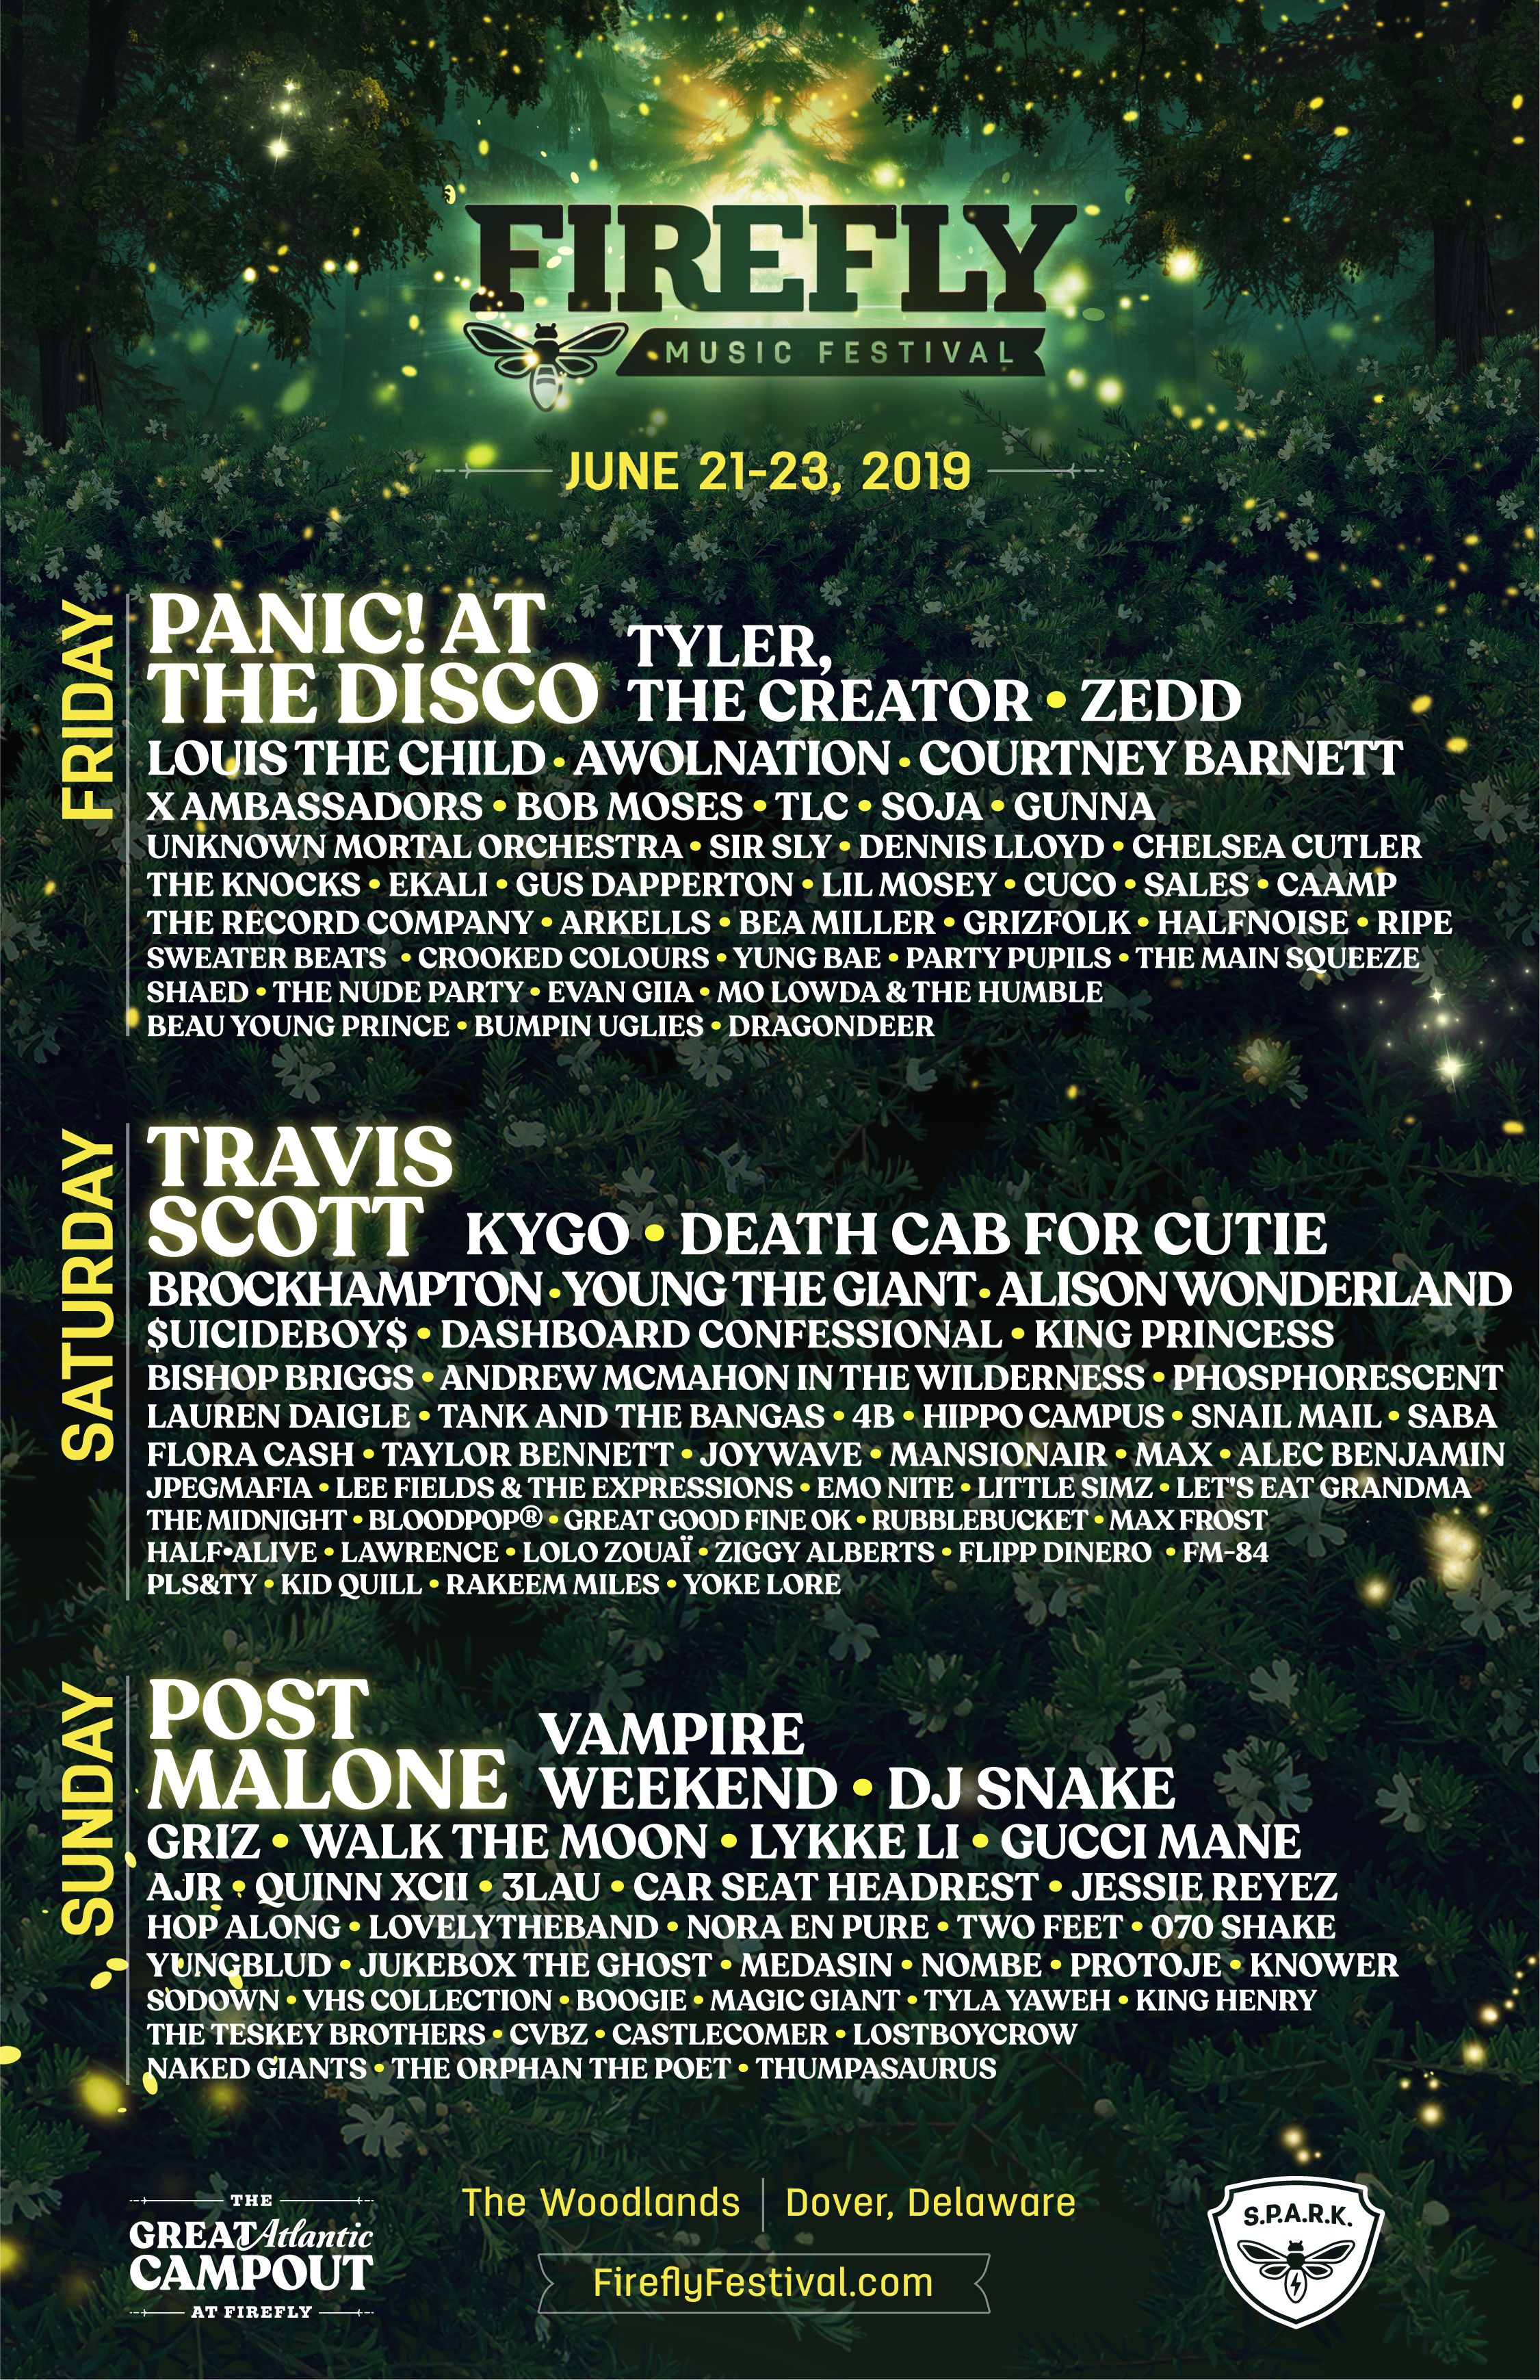 Firefly 2019's lineup led by Panic! At The Disco, Travis Scott, Post